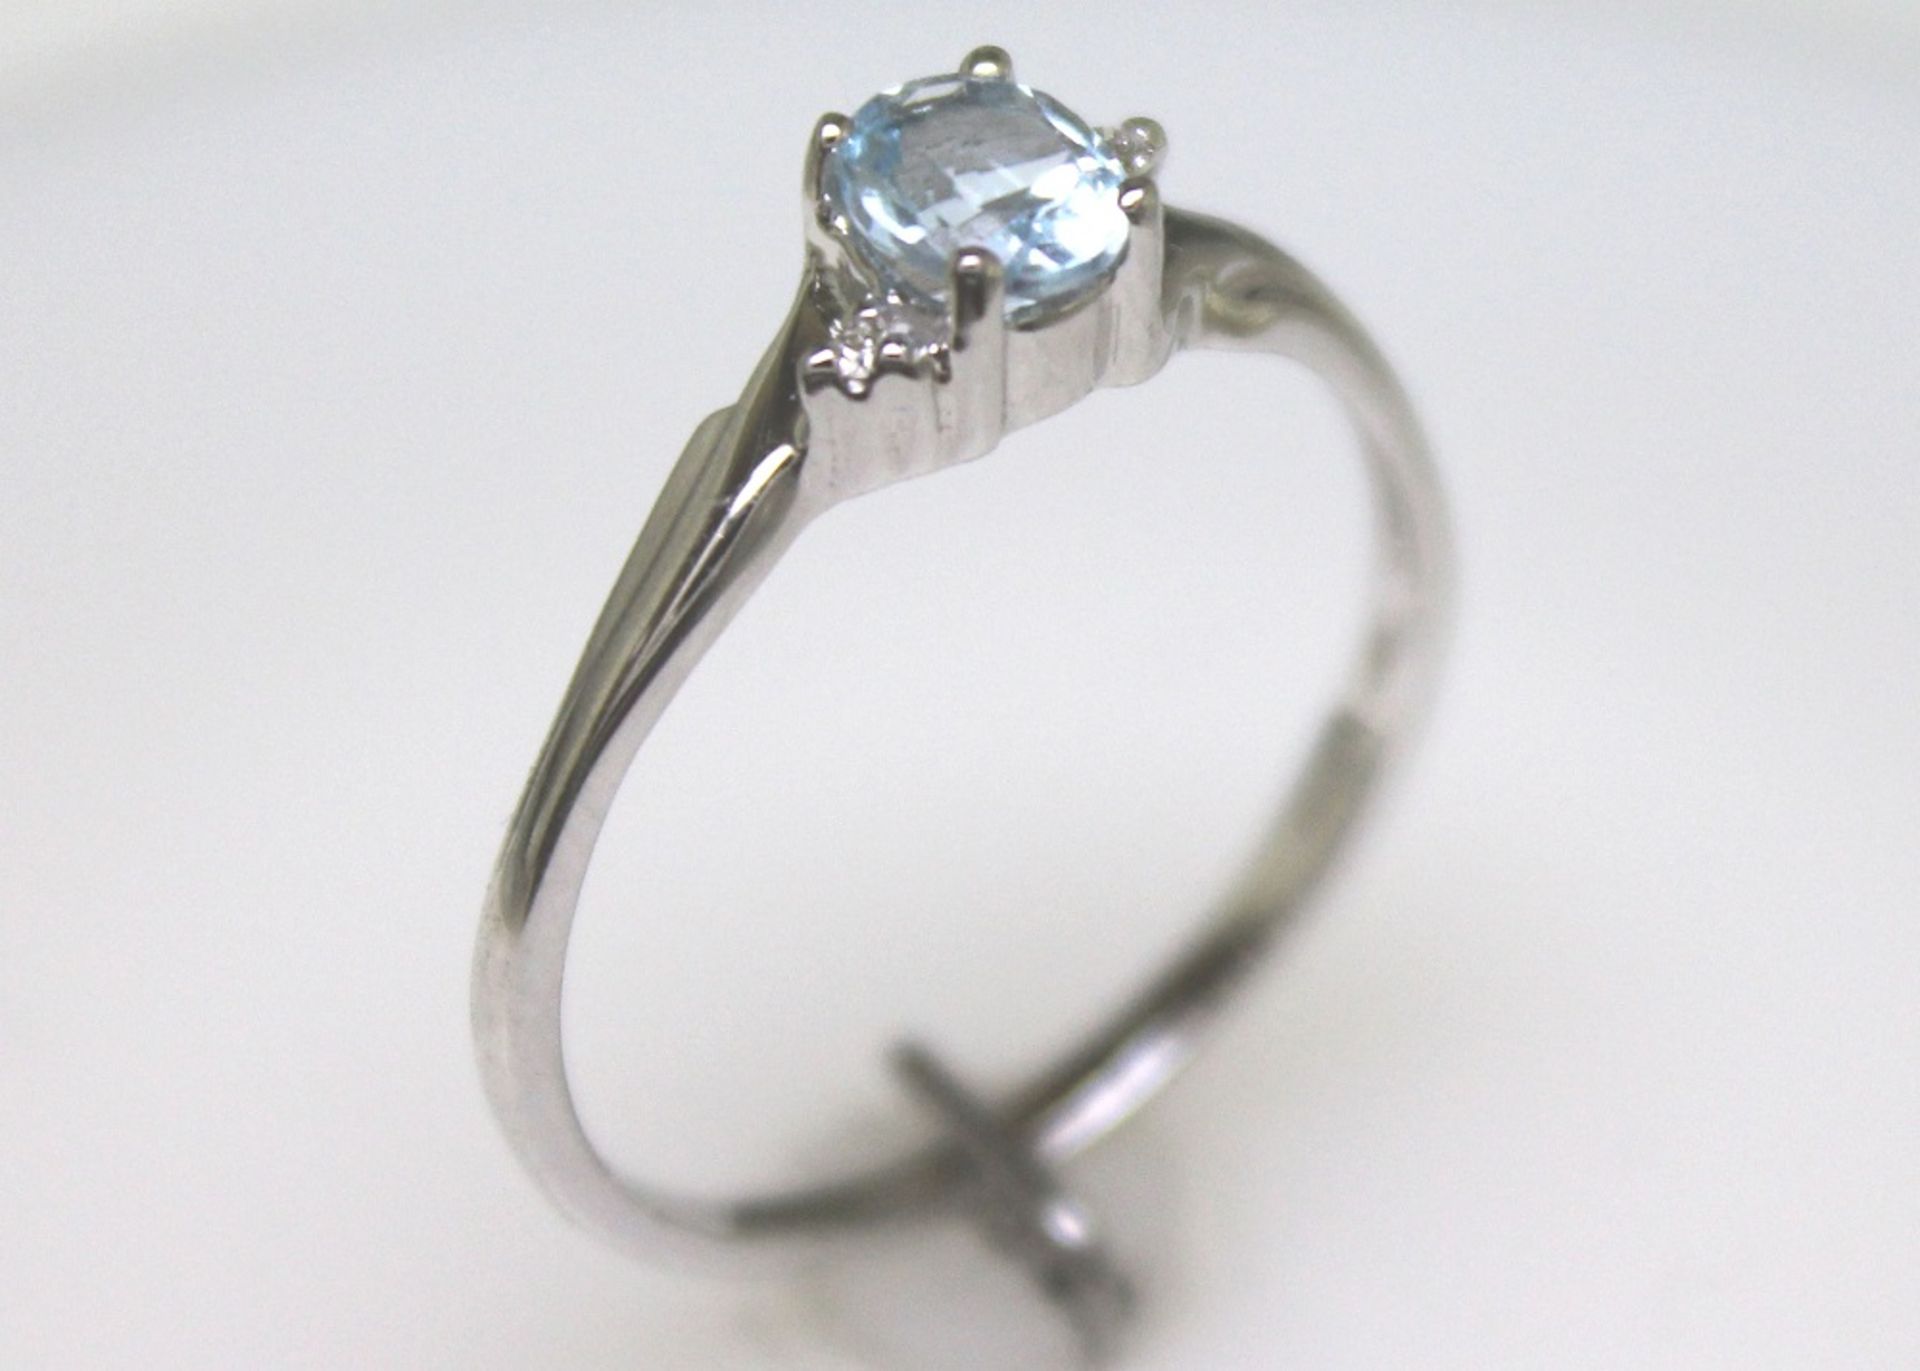 9ct White Gold Diamond and Blue Topaz Ring (BT0.50) 0.01 Carats - Image 7 of 10